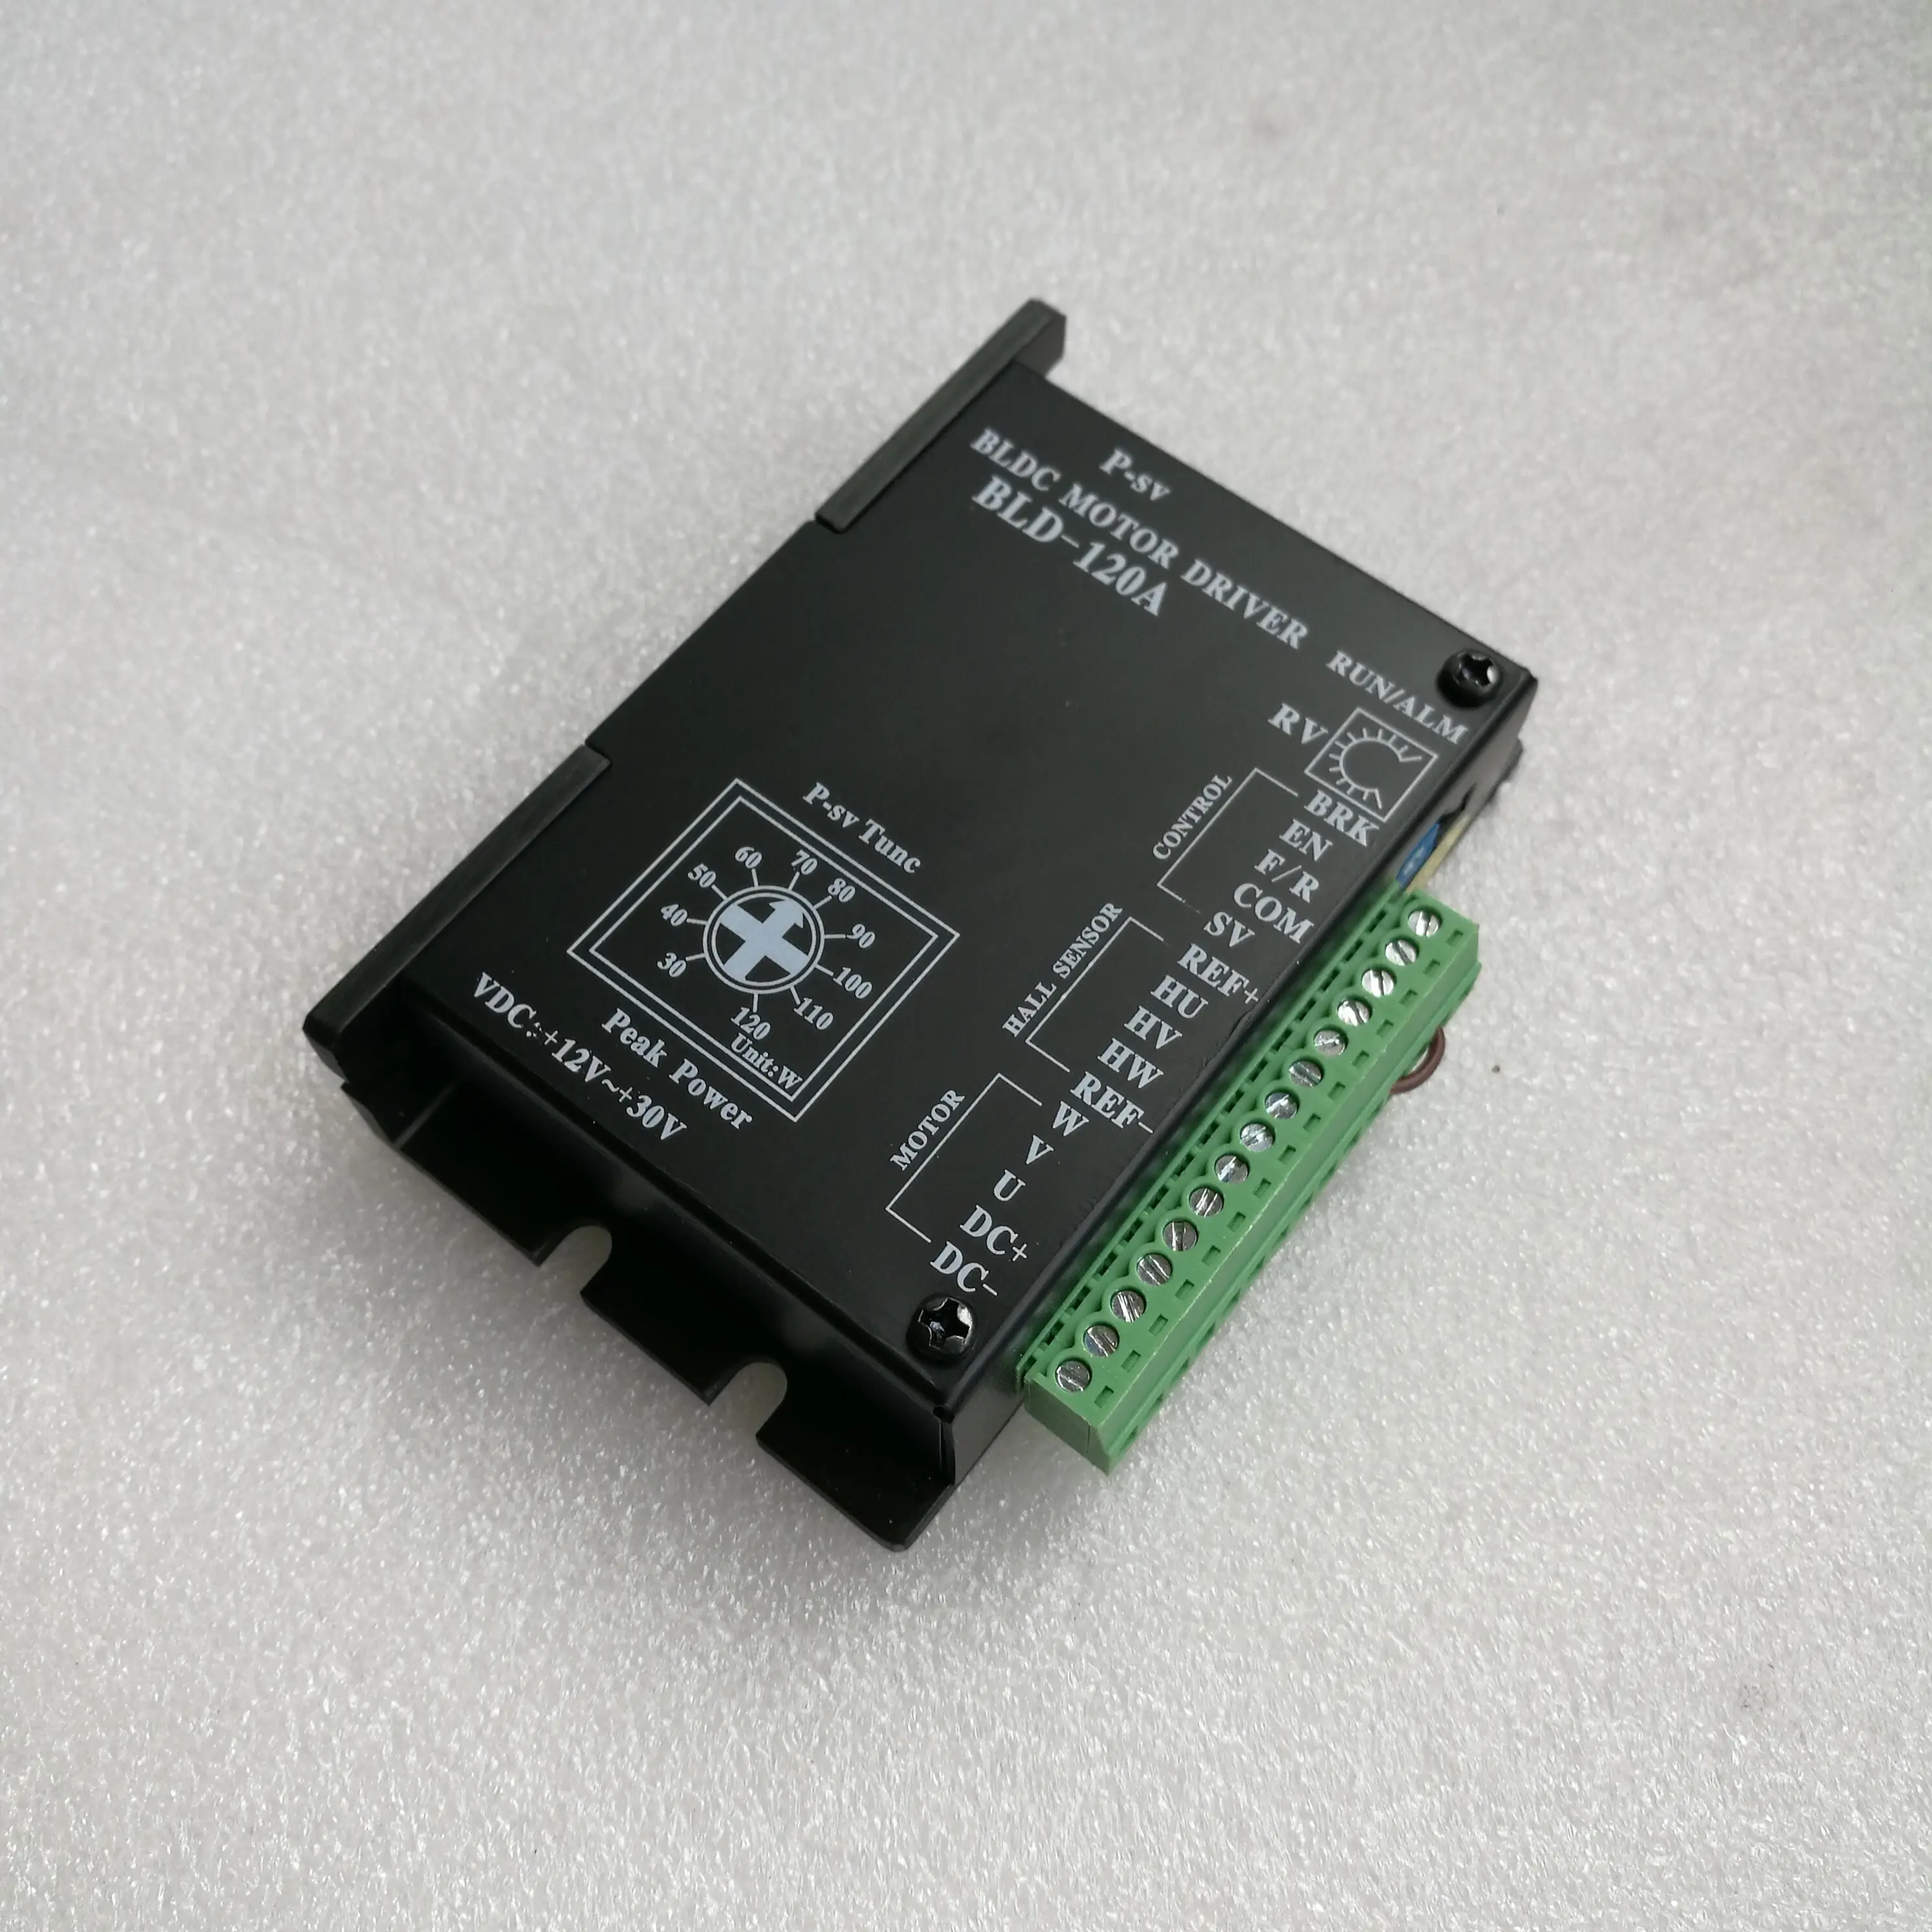 bld-120a-brushless-motor-driver